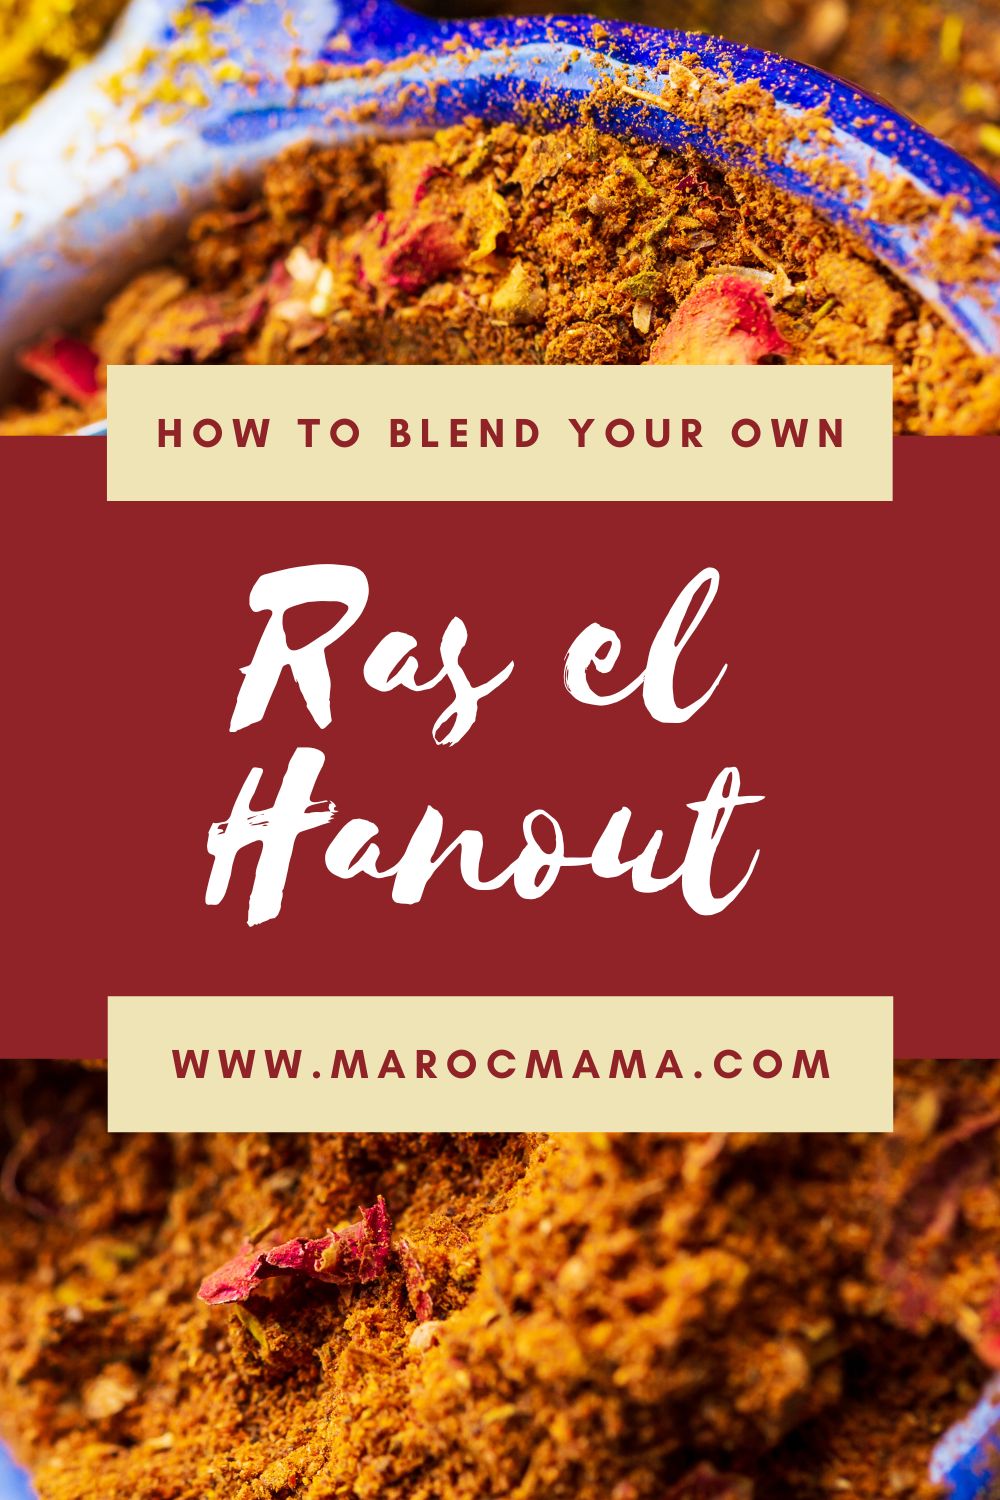 Ras el hanout Moroccan spice mix with the text How to blend your own ras el hanout